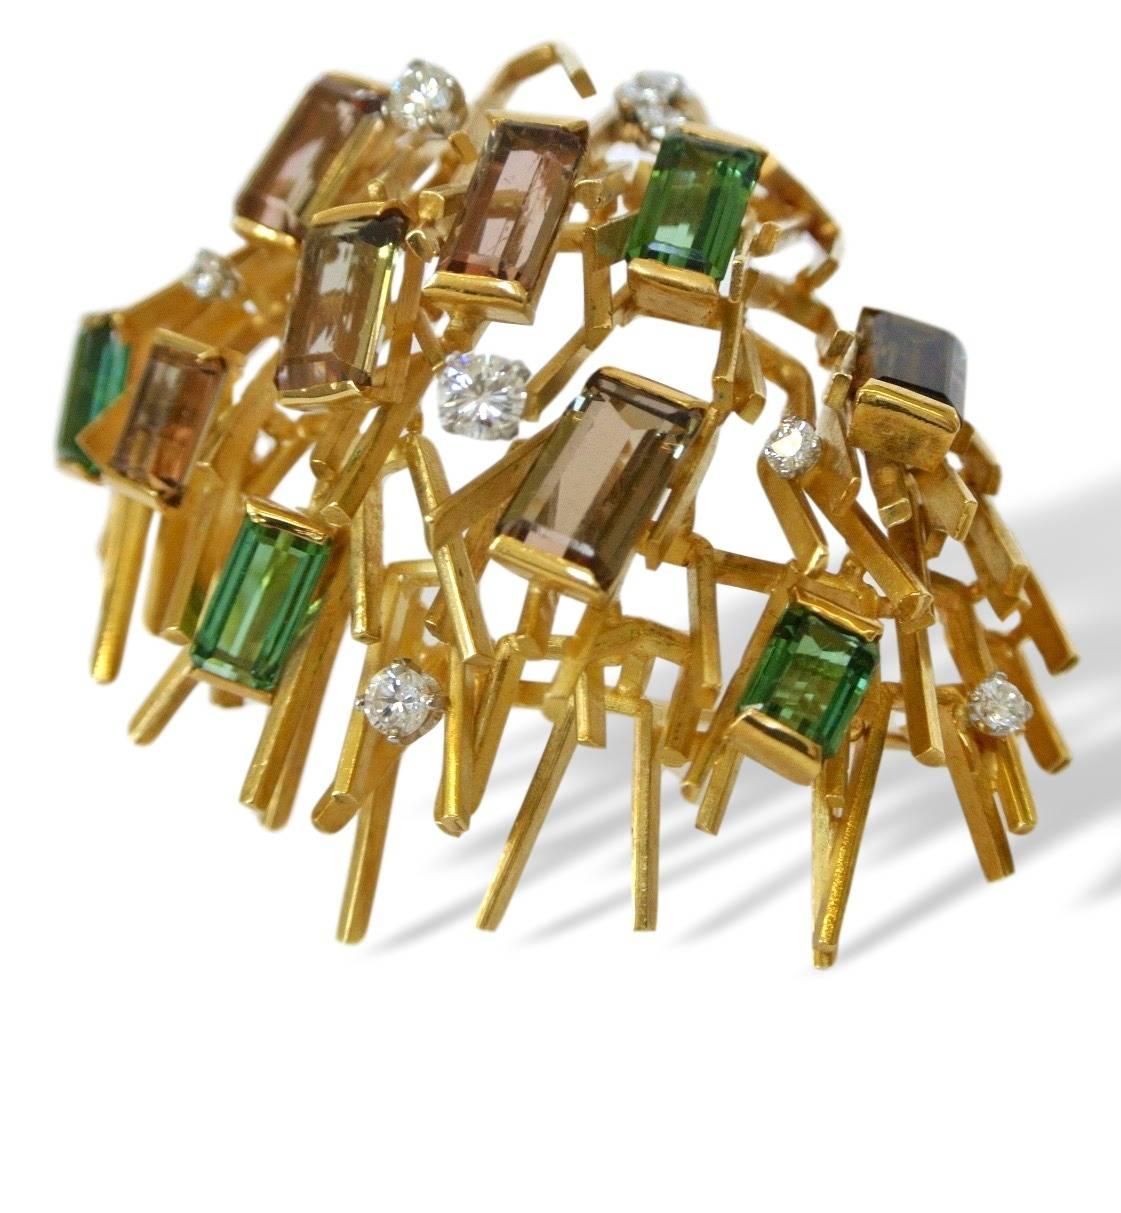 An early Geometric Brooch by Andrew Grima. The 18k yellow gold brooch with multiple gold rods, rectangular-cut green and & watermelon tourmaline, accented with round white diamonds. A chic and stylish brooch by master artist jeweler Andrew